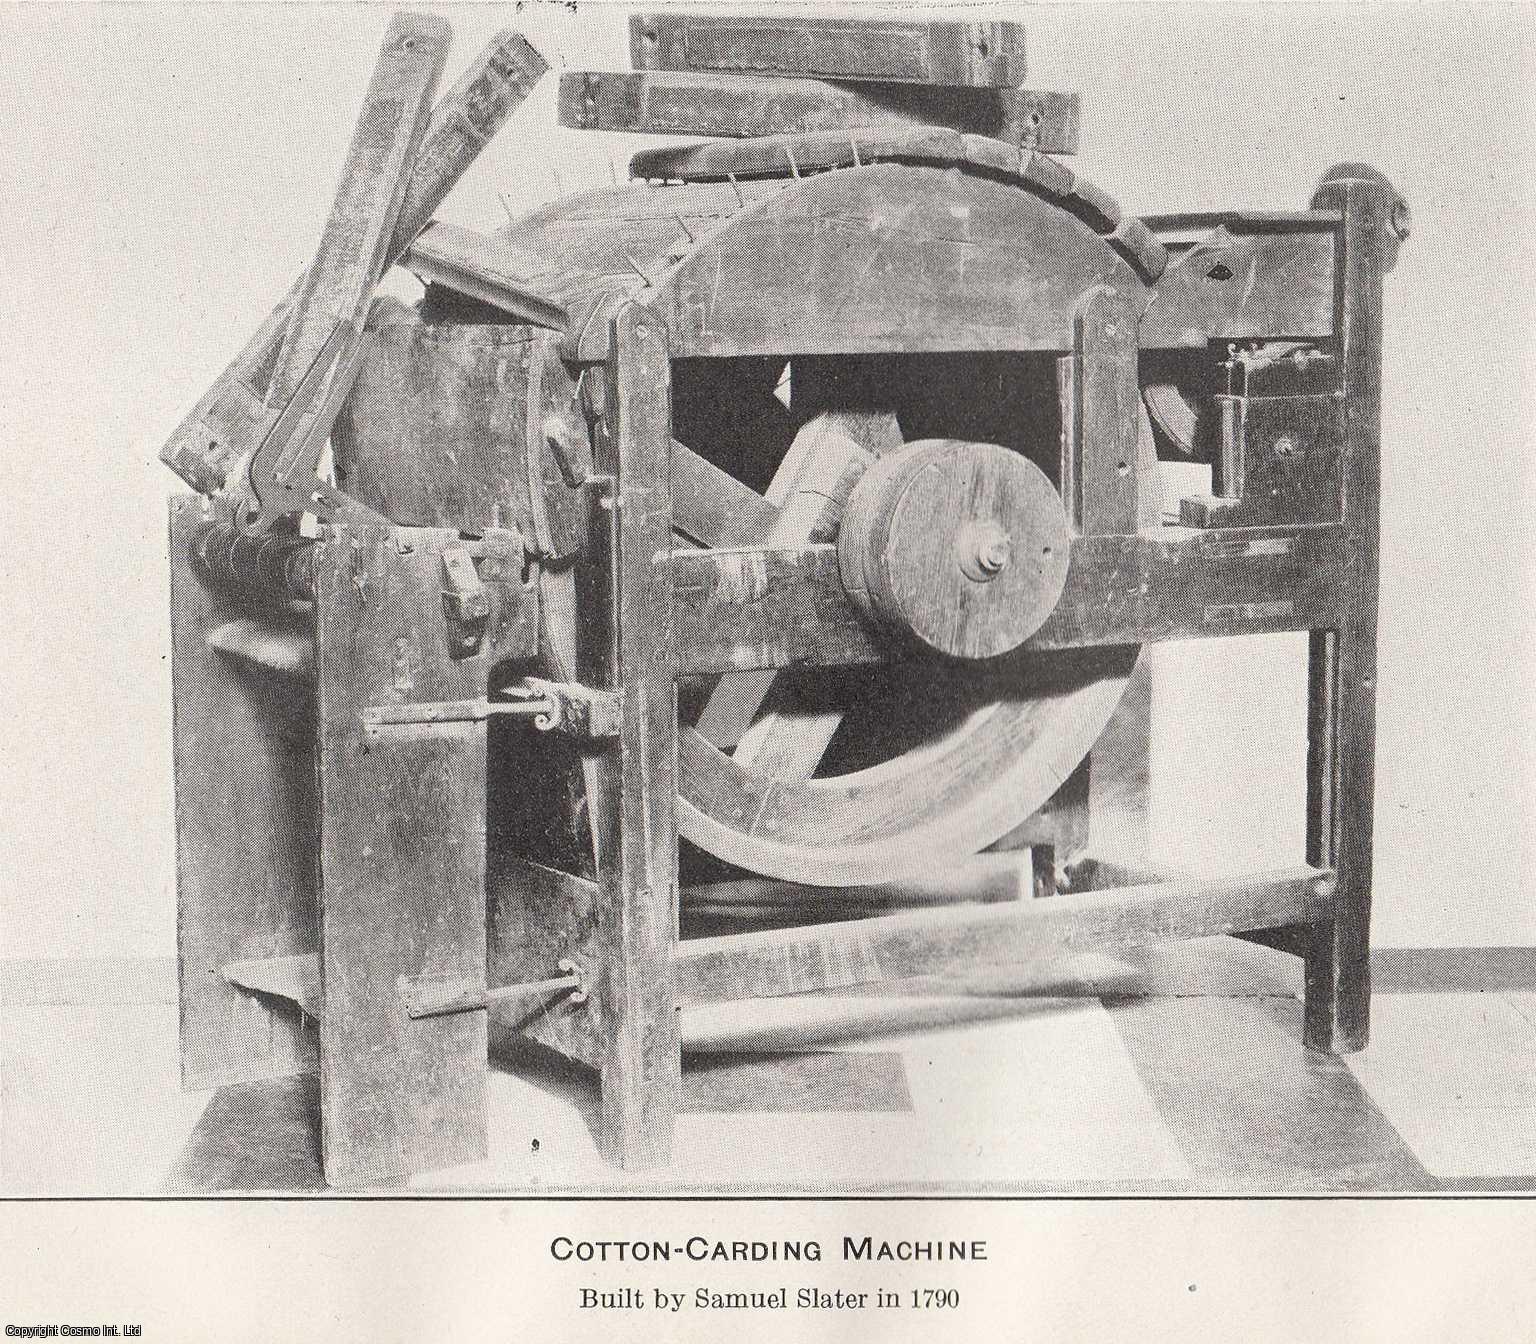 Frederick L. Lewton - Samuel Slater and The Oldest Cotton Machinery in America. An original article from the Report of the Smithsonian Institution, 1926.